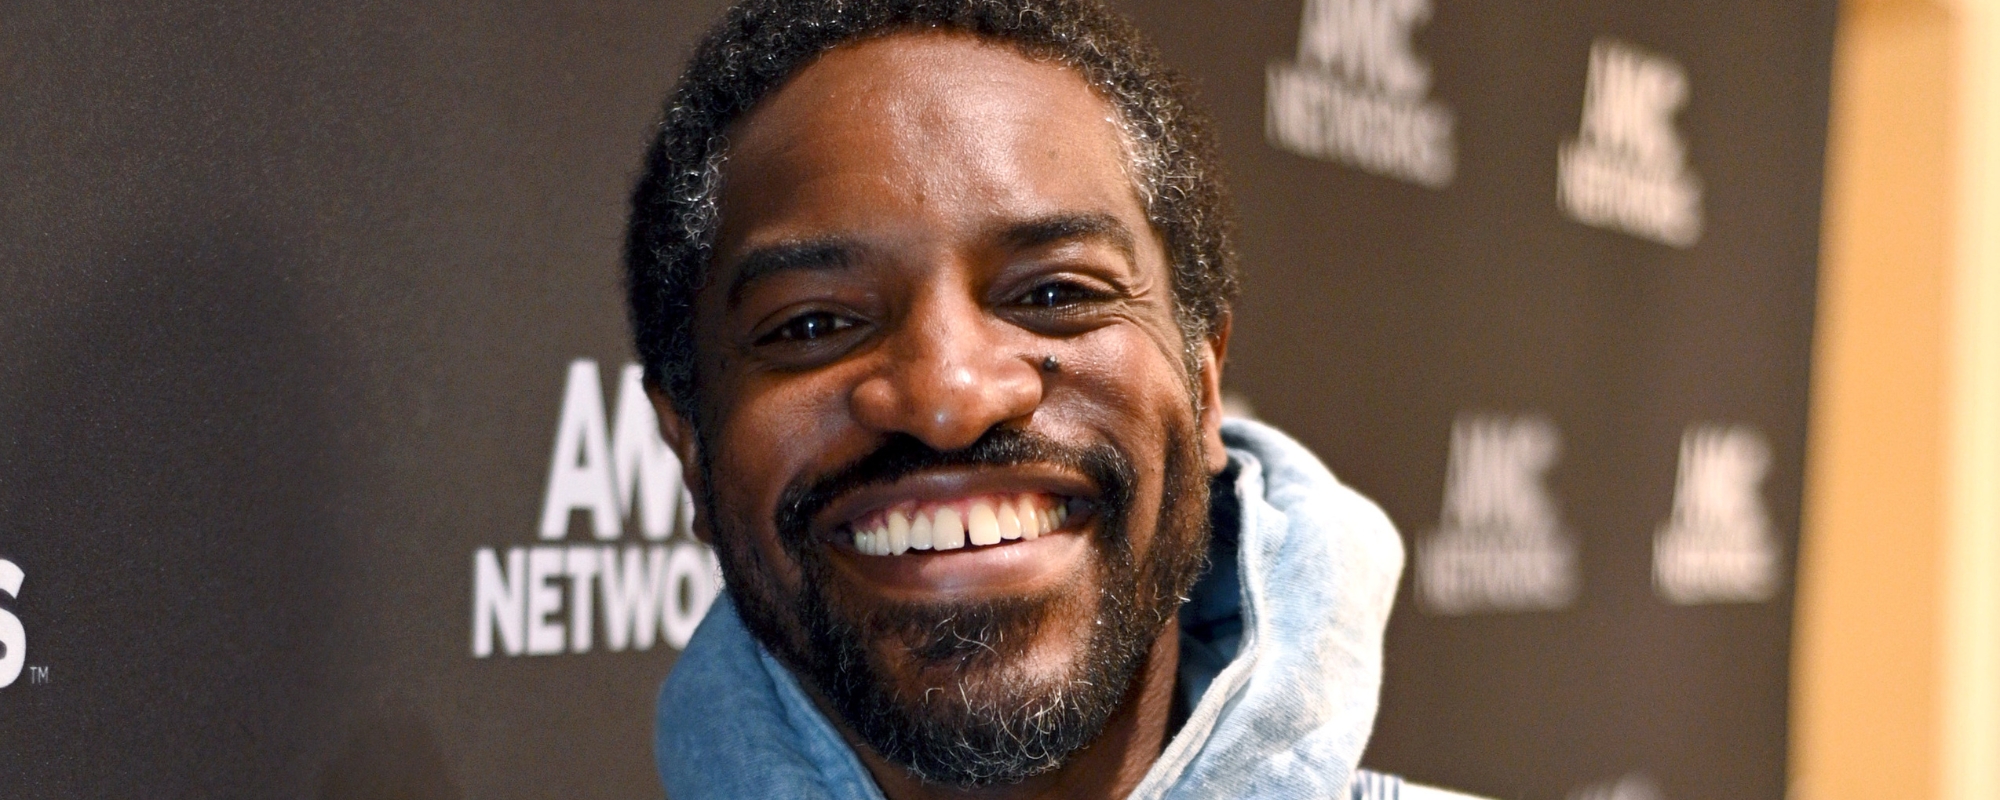 André 3000 Breaks Billboard Record with Longest Song in Hot 100 History